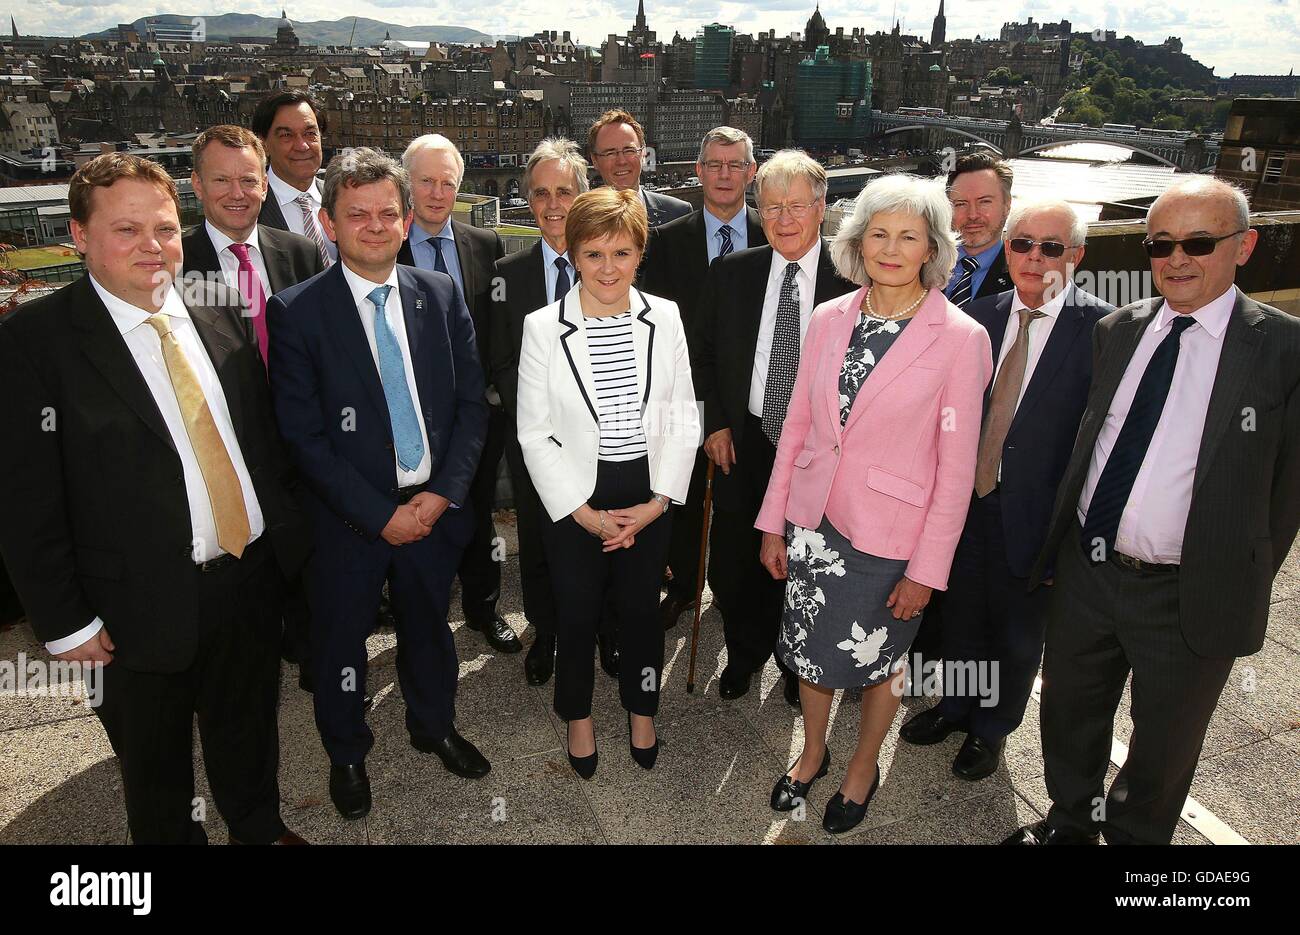 The Standing Council for Europe hold their inaugural meeting at St Andrews House in Edinburgh, (front row left to right) Fabian Zuleeg, EU policy Centre, Prof Anton Muscatelli, Chair and University of Glasgow, First Minister Nicola Sturgeon, Dame Mariot Leslie, Sir David Edward, retired EU court judge, (second row left to right) David Frost, Scotch Whisky Association, Vasco Cal, fomer economic advisor Euro Commision, Grahame Smith, Professor Andrew Scott, Dr Alasdair Allan, Europe Minister, David Martin MEP, Alyn Smith MEP, John Kay, economics expert, and Lord John Kerr. Stock Photo